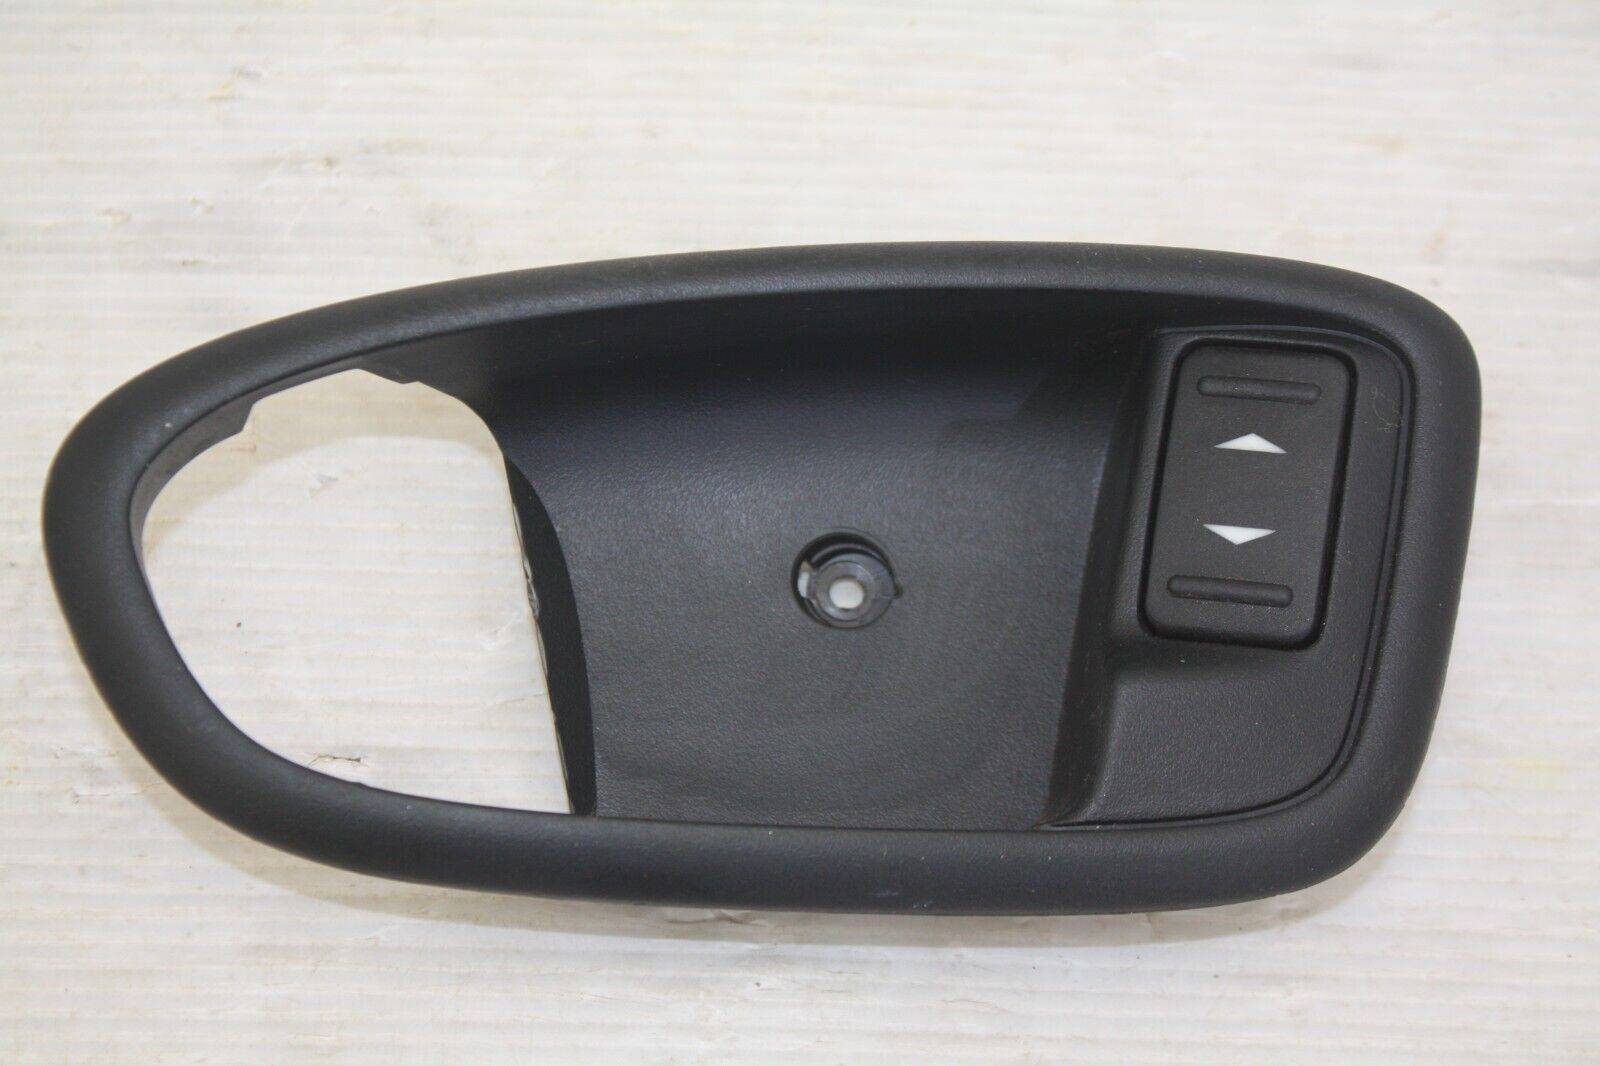 Ford S Max Front Left Door Handle Surround Trim 2010 to 2015 6M21 U226A37 BCW 176008398752